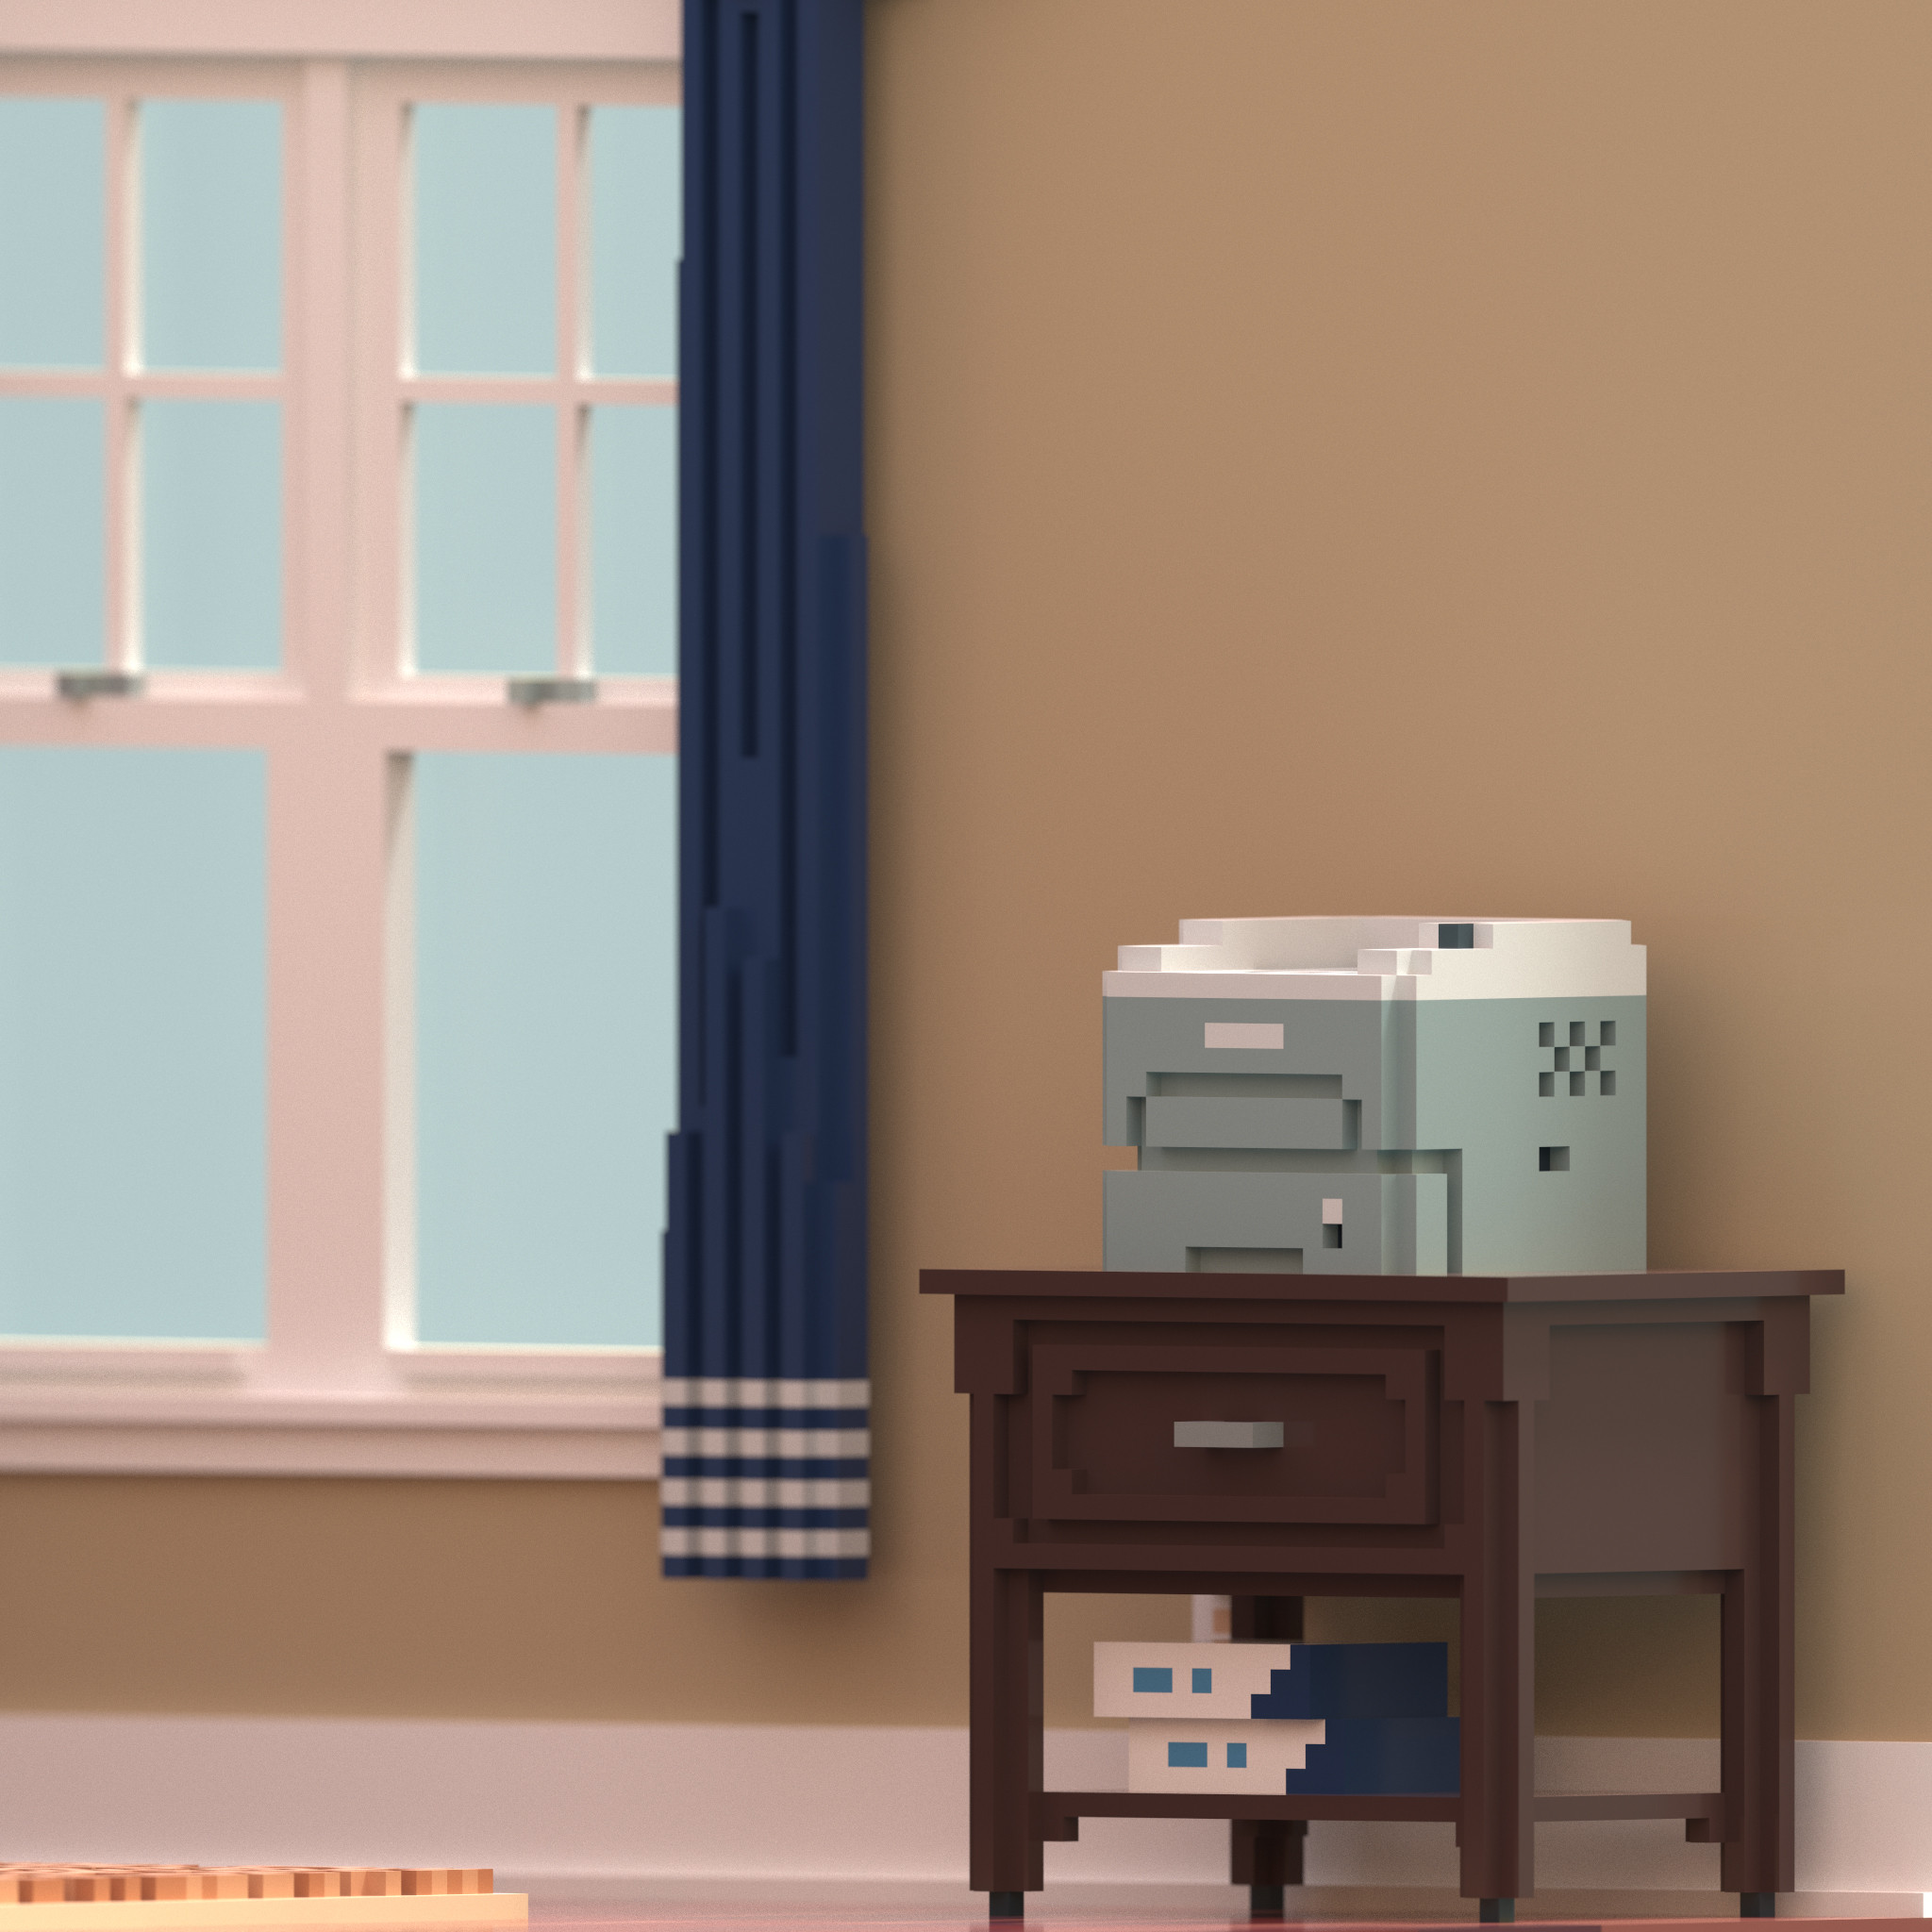 Render detailing the office printer and stand near a window.